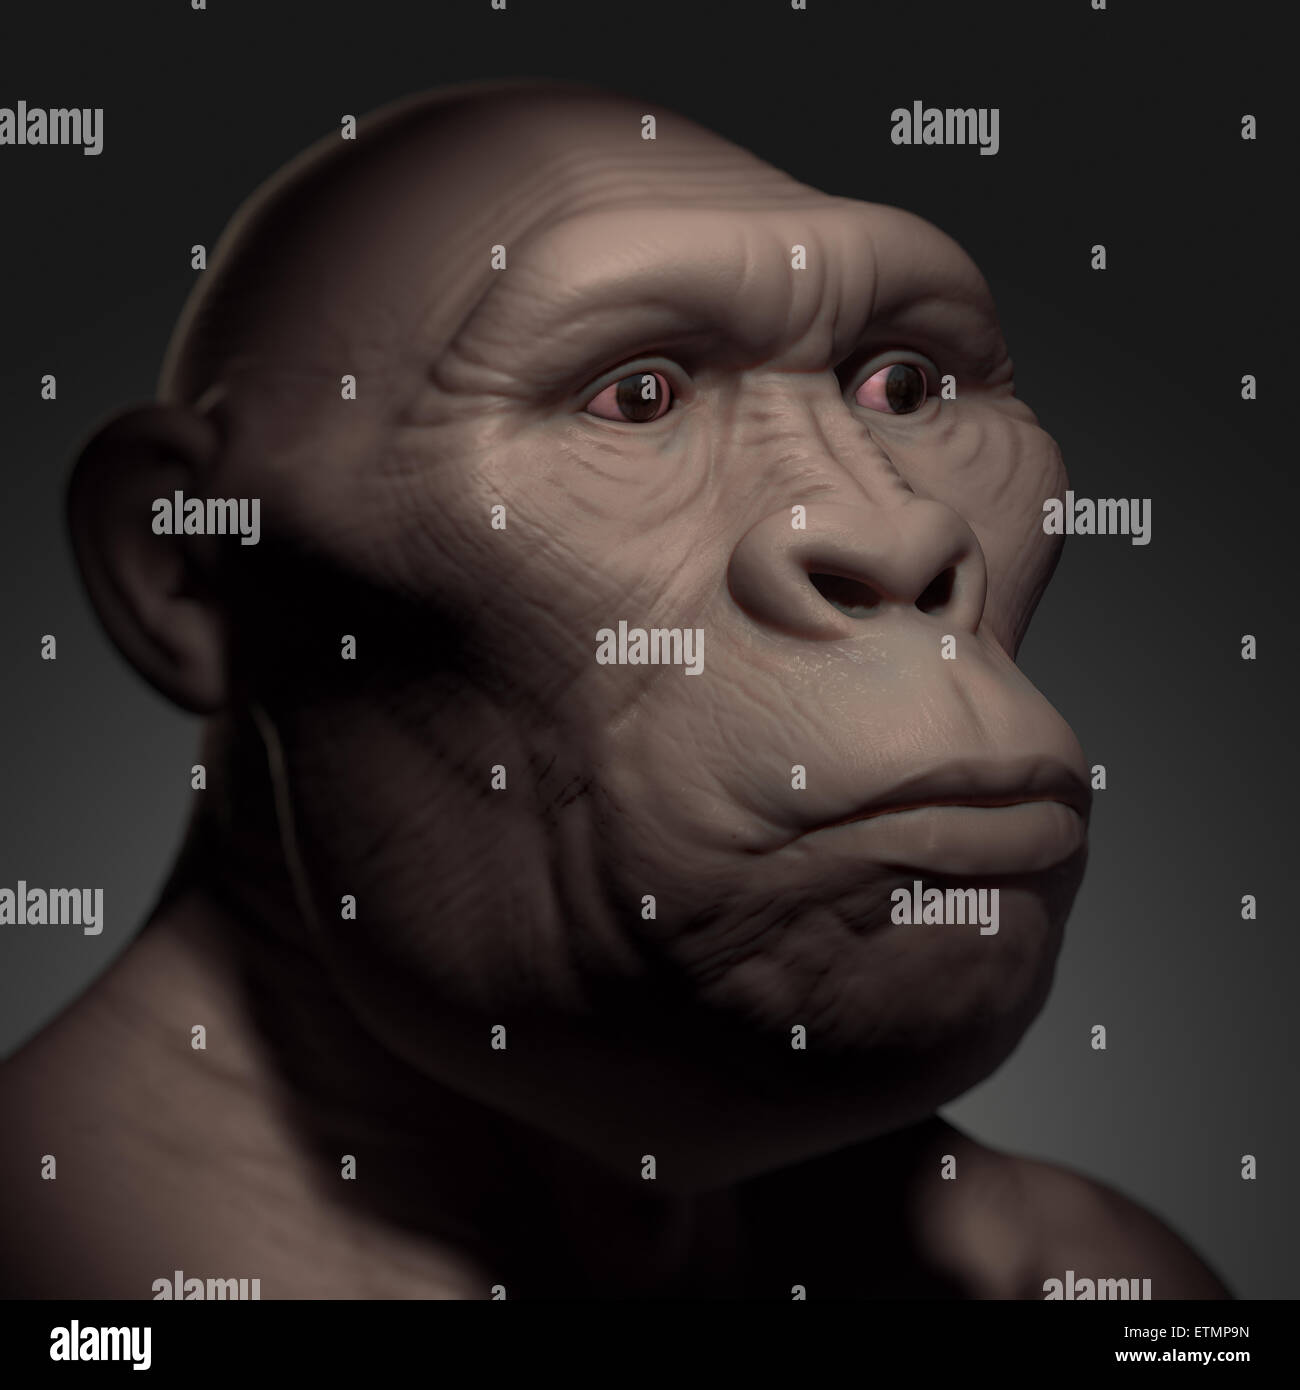 Depiction of an Australopithecus, an extinct genus of hominids and early ancestor to Homo Sapiens. Stock Photo